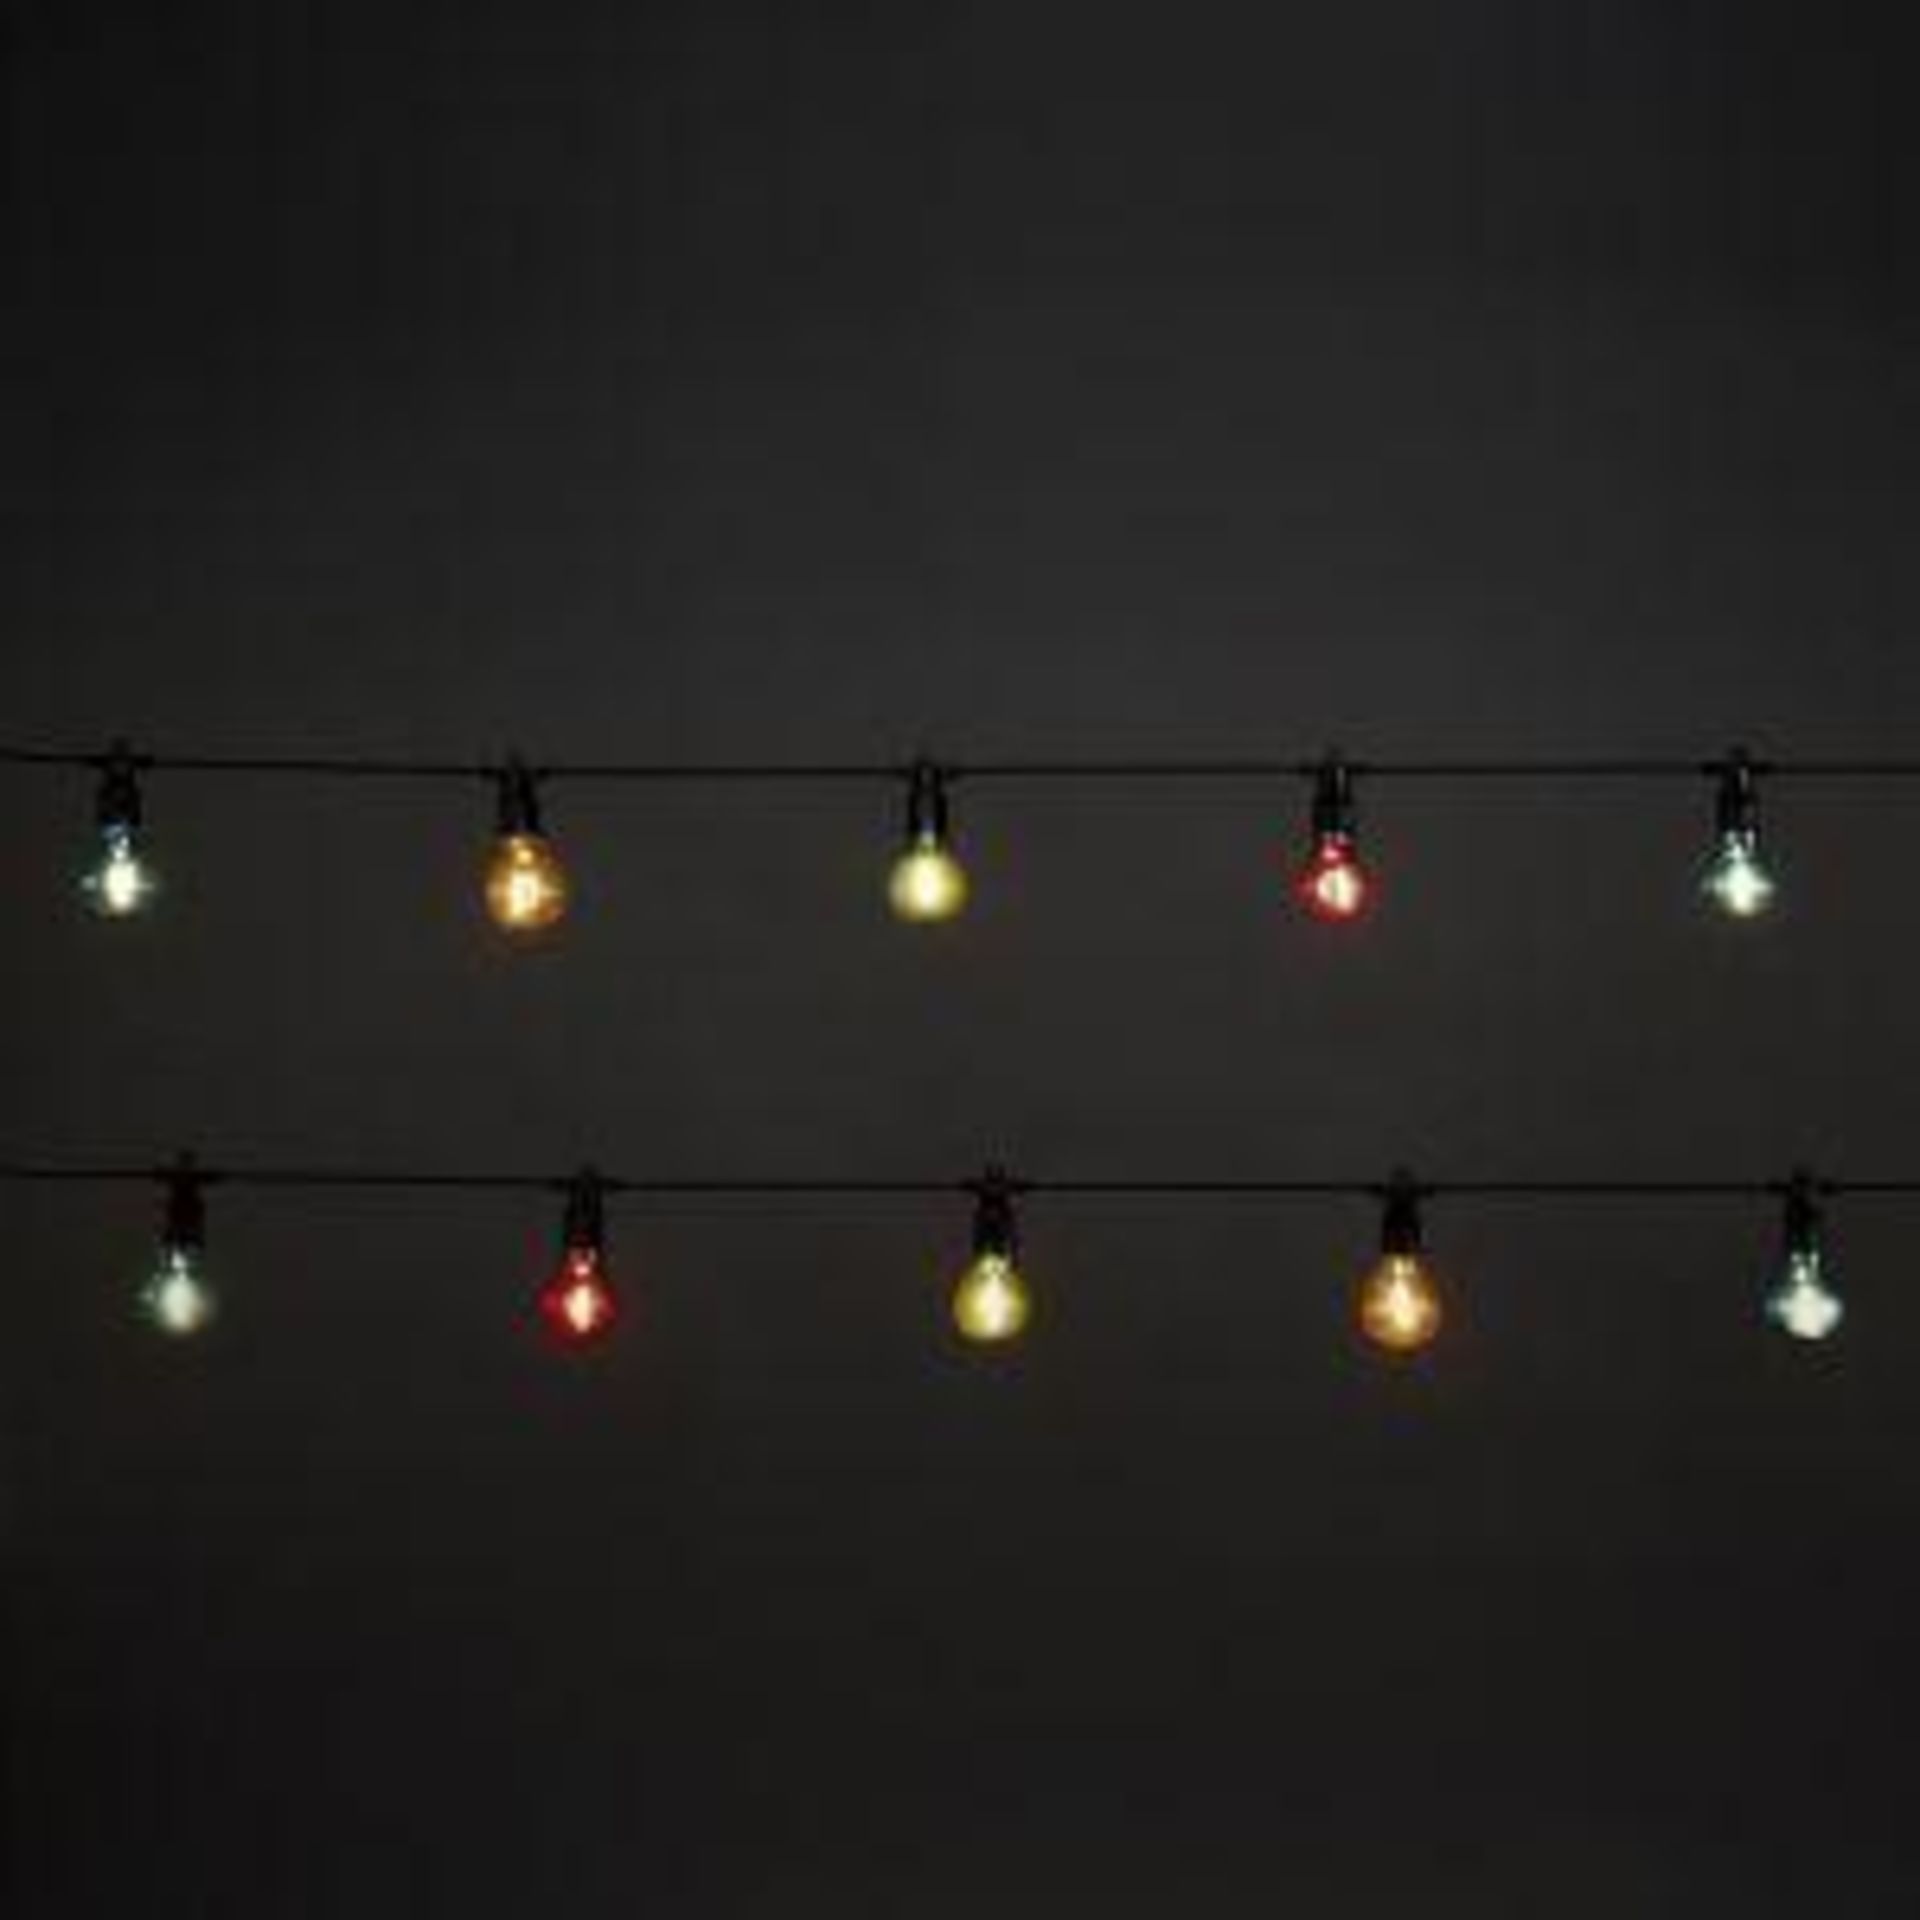 20 Warm White Festoon Connectable Multicoloured LED String Lights with Black Cable - P4. These